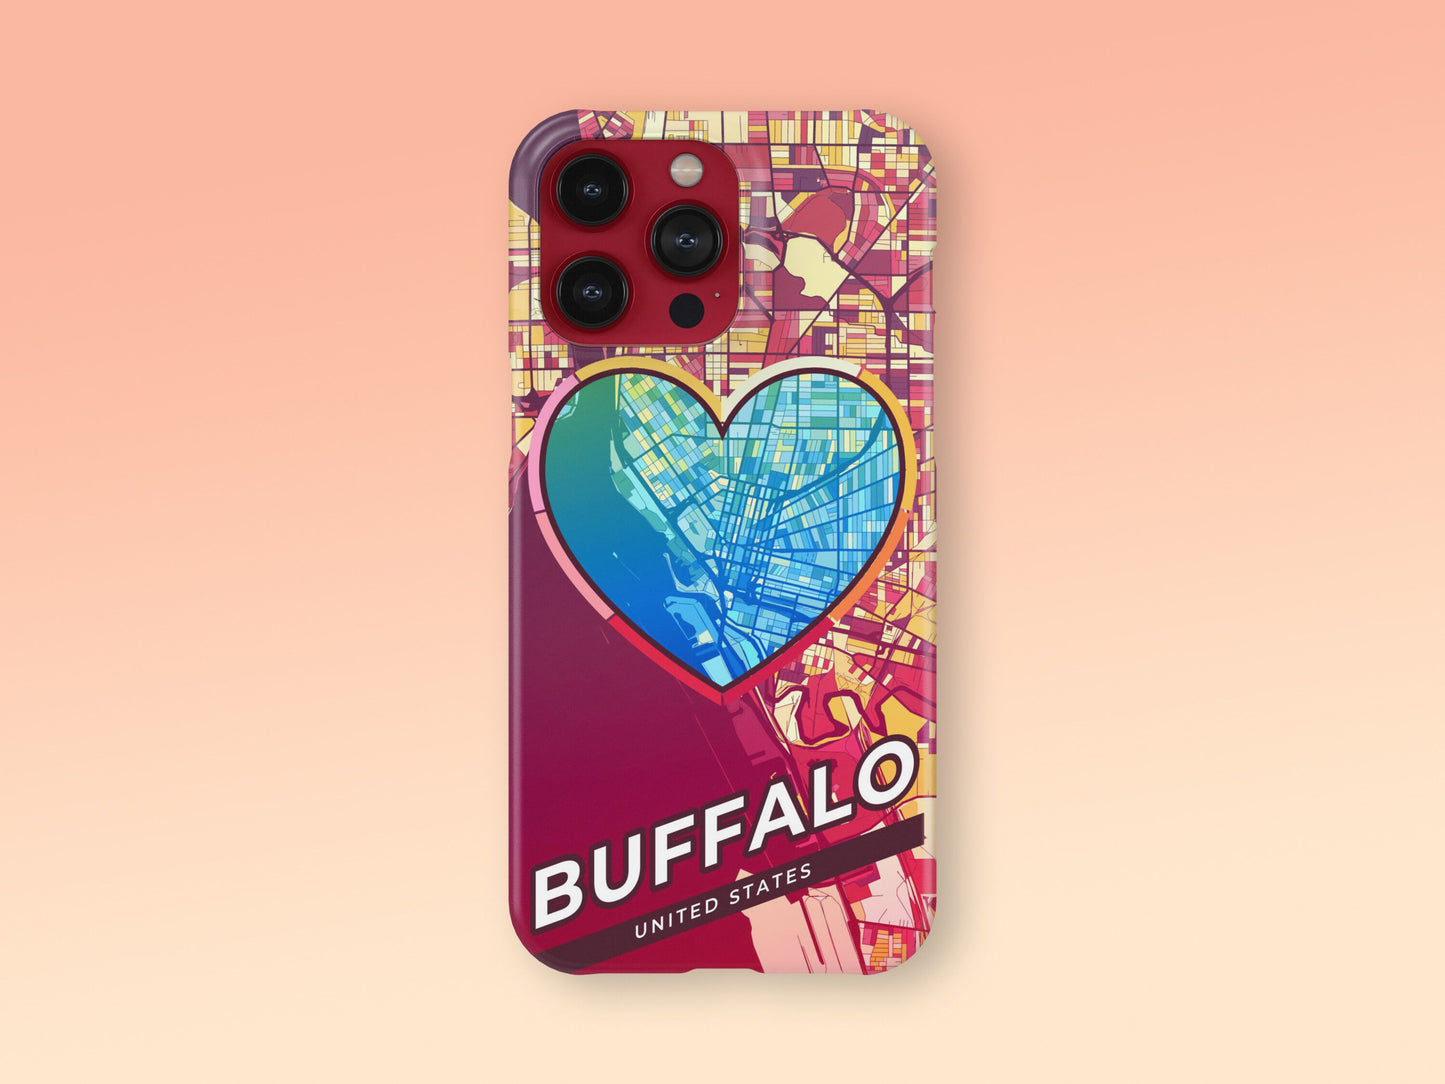 Buffalo New York slim phone case with colorful icon. Birthday, wedding or housewarming gift. Couple match cases. 2